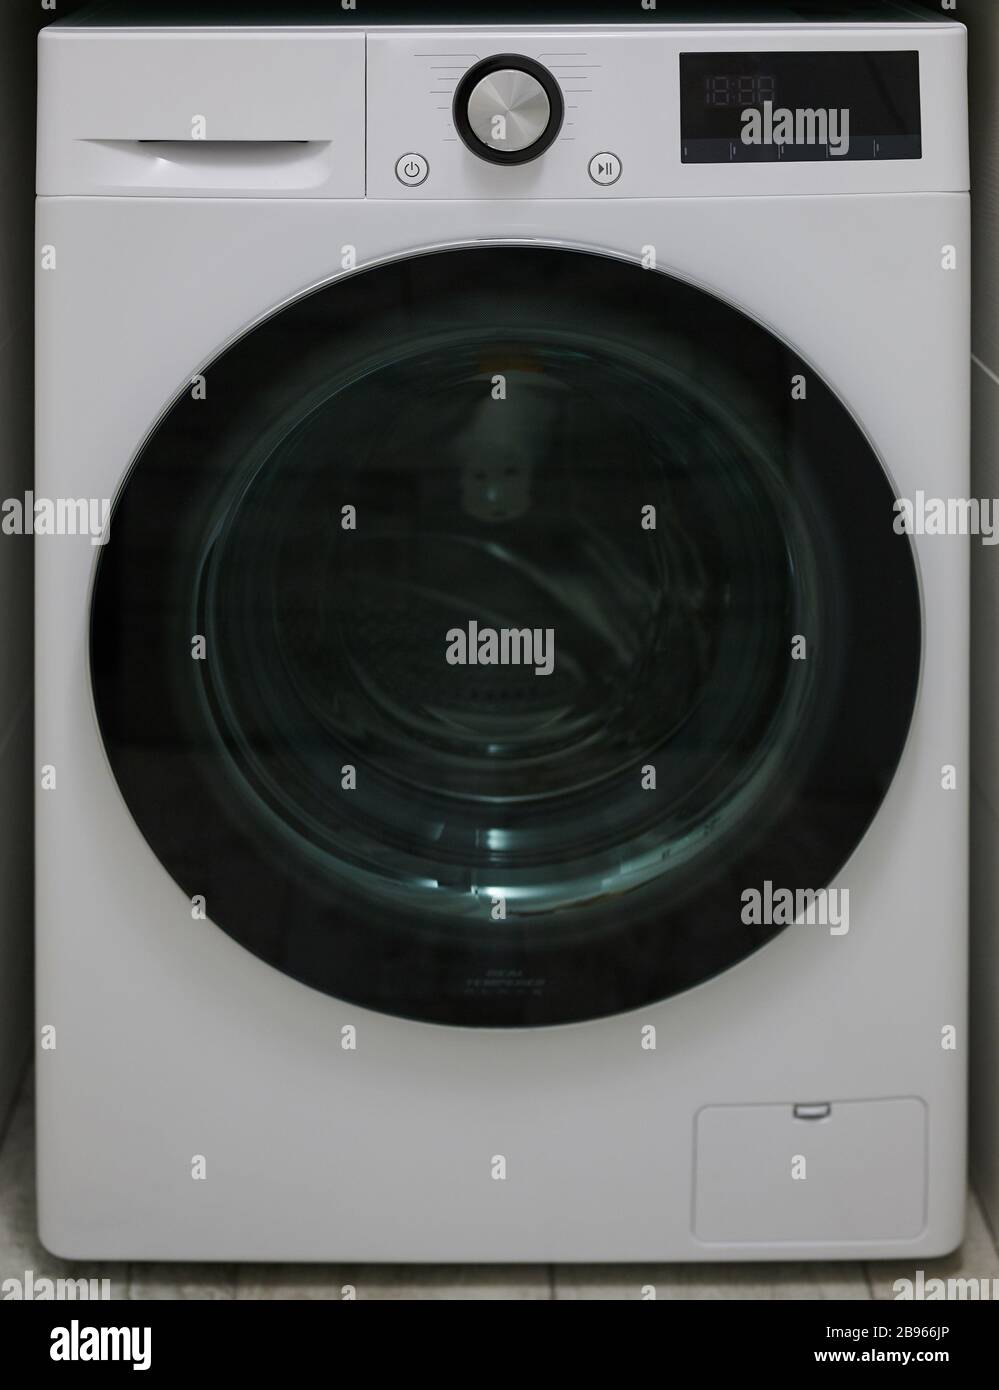 New electronic washing machine front view with dark glass door Stock Photo